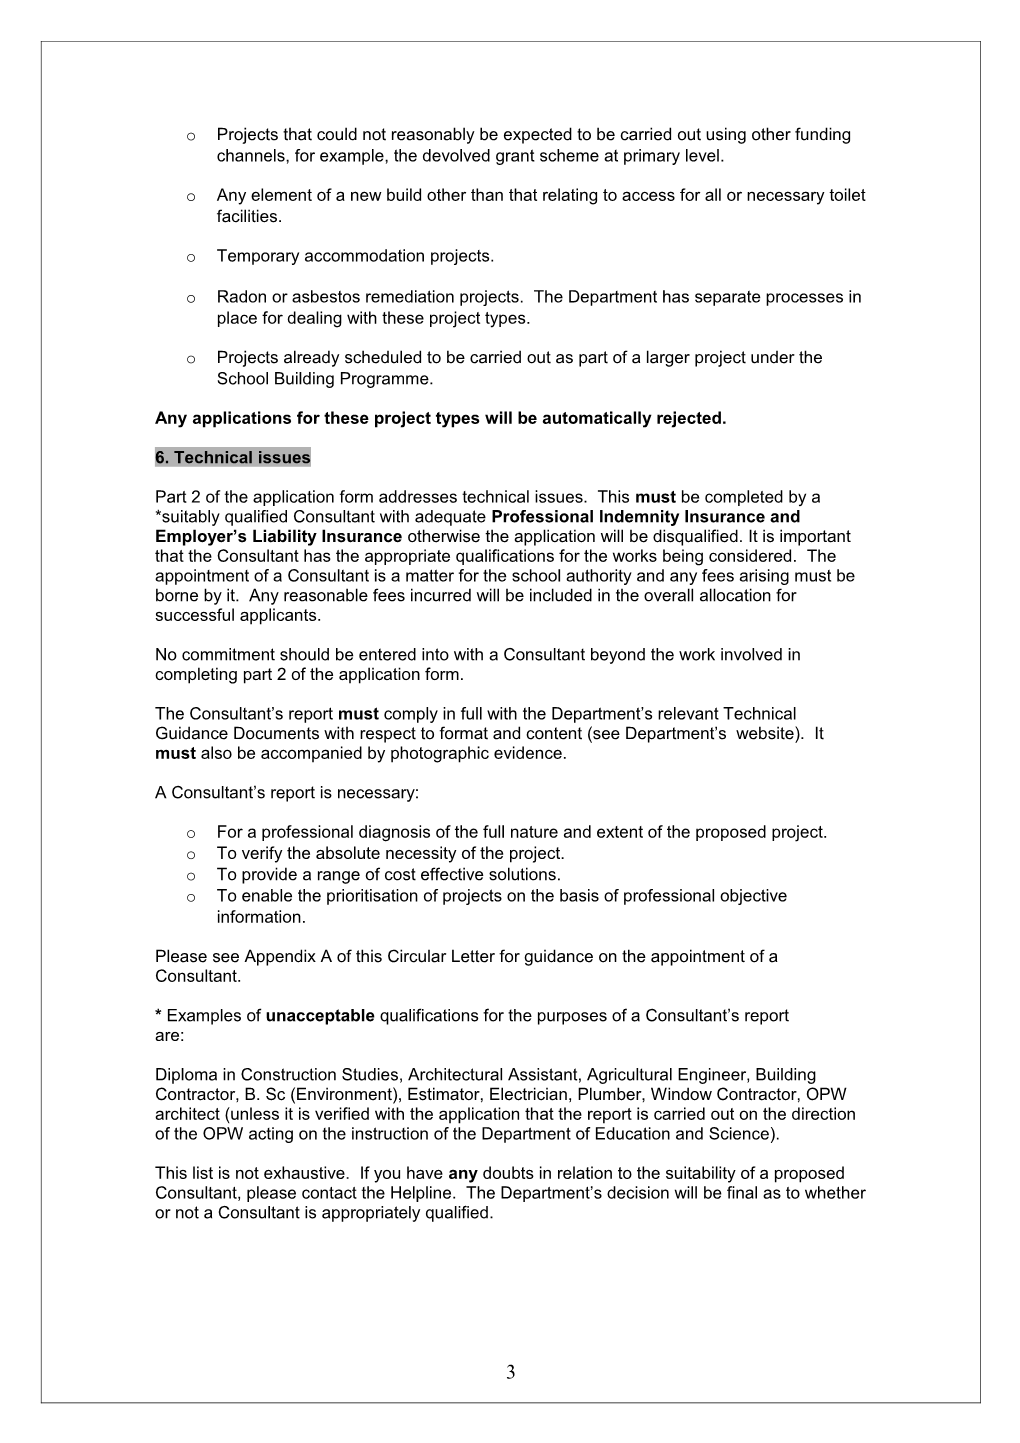 Circular 0043/2007 - Summer Works Scheme 2008 - Scheme of Capital Grants for Small Scale